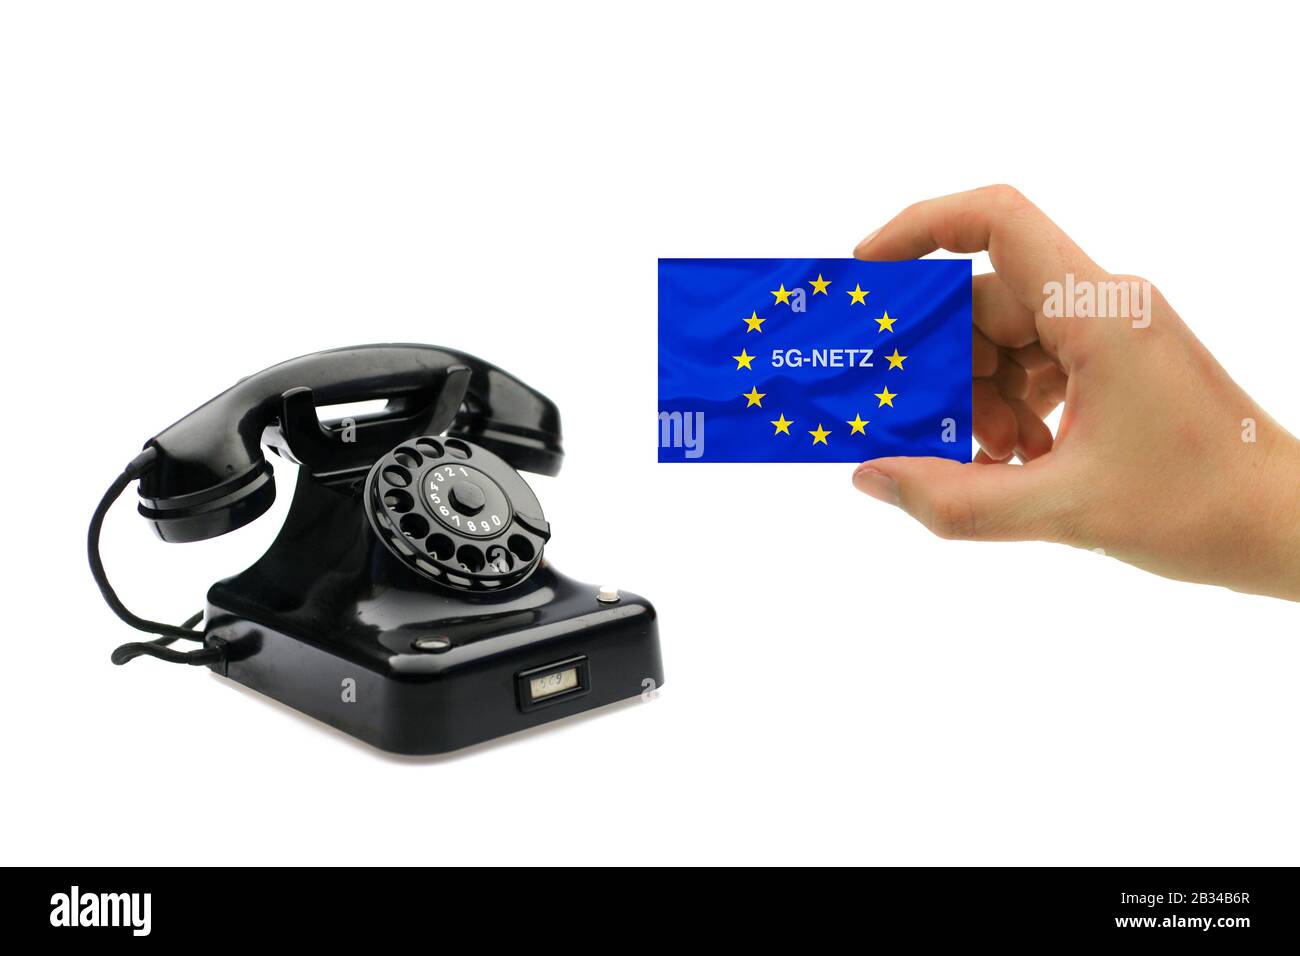 5G network, hand with calling card and old analog telephone, Europe Stock Photo